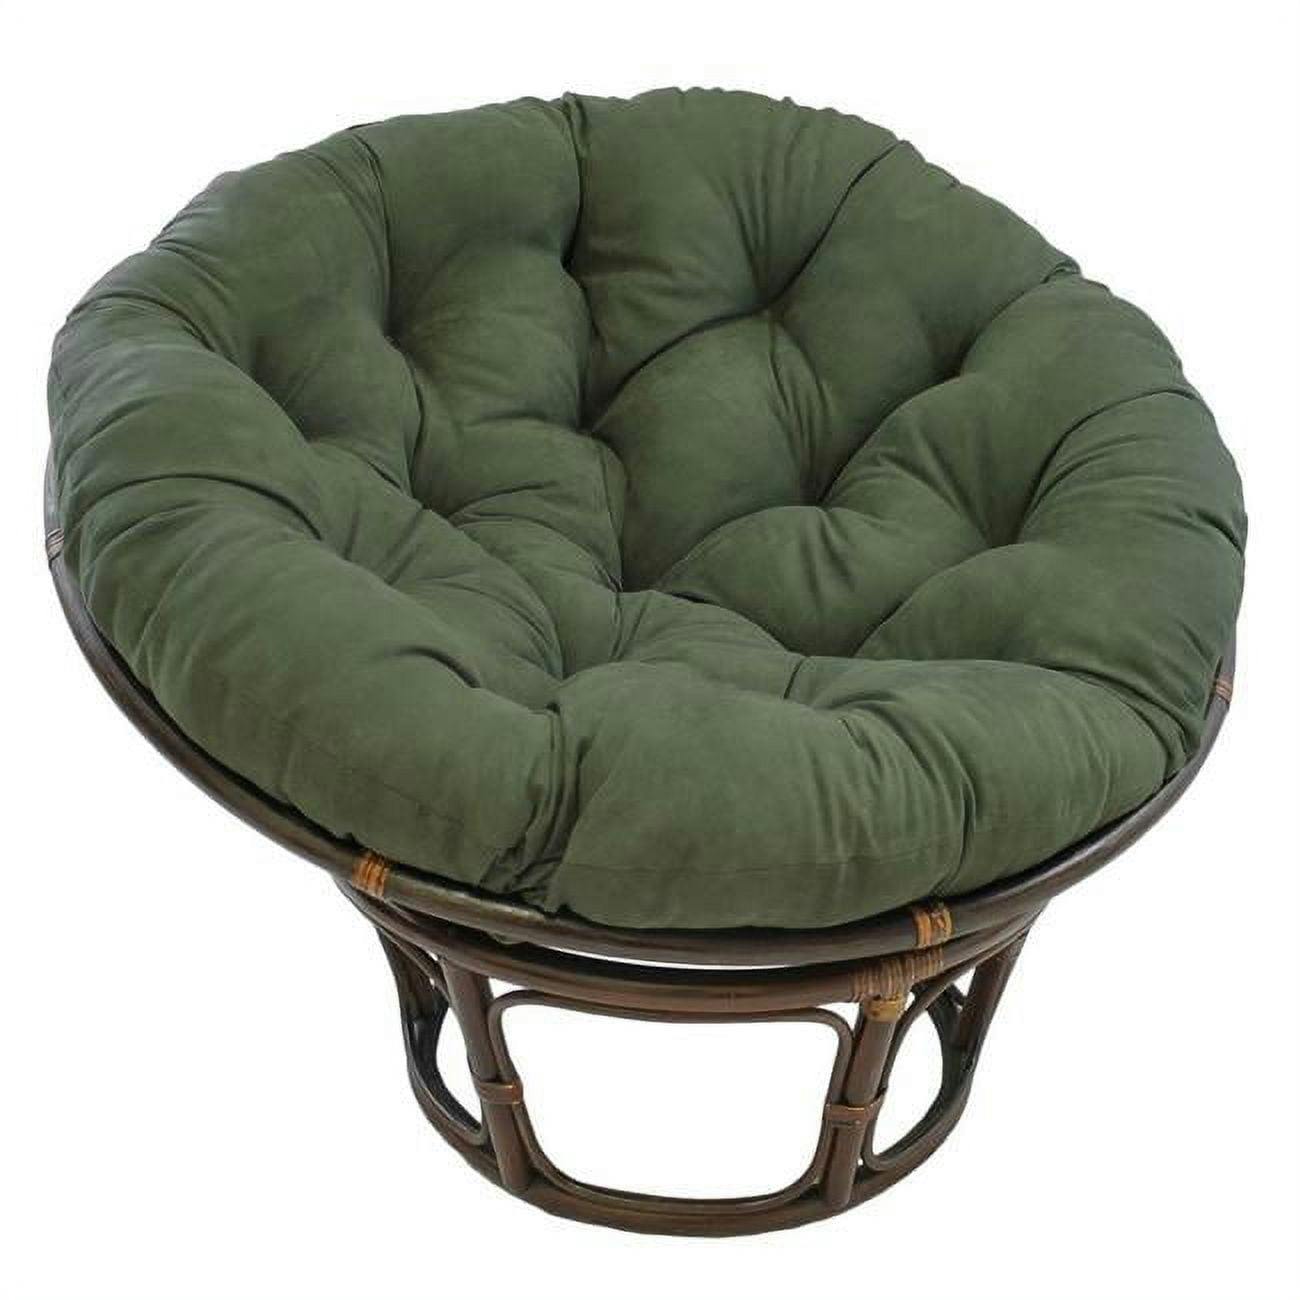 Eco-Friendly Green Microfiber Papasan Chair with Handcrafted Rattan Base